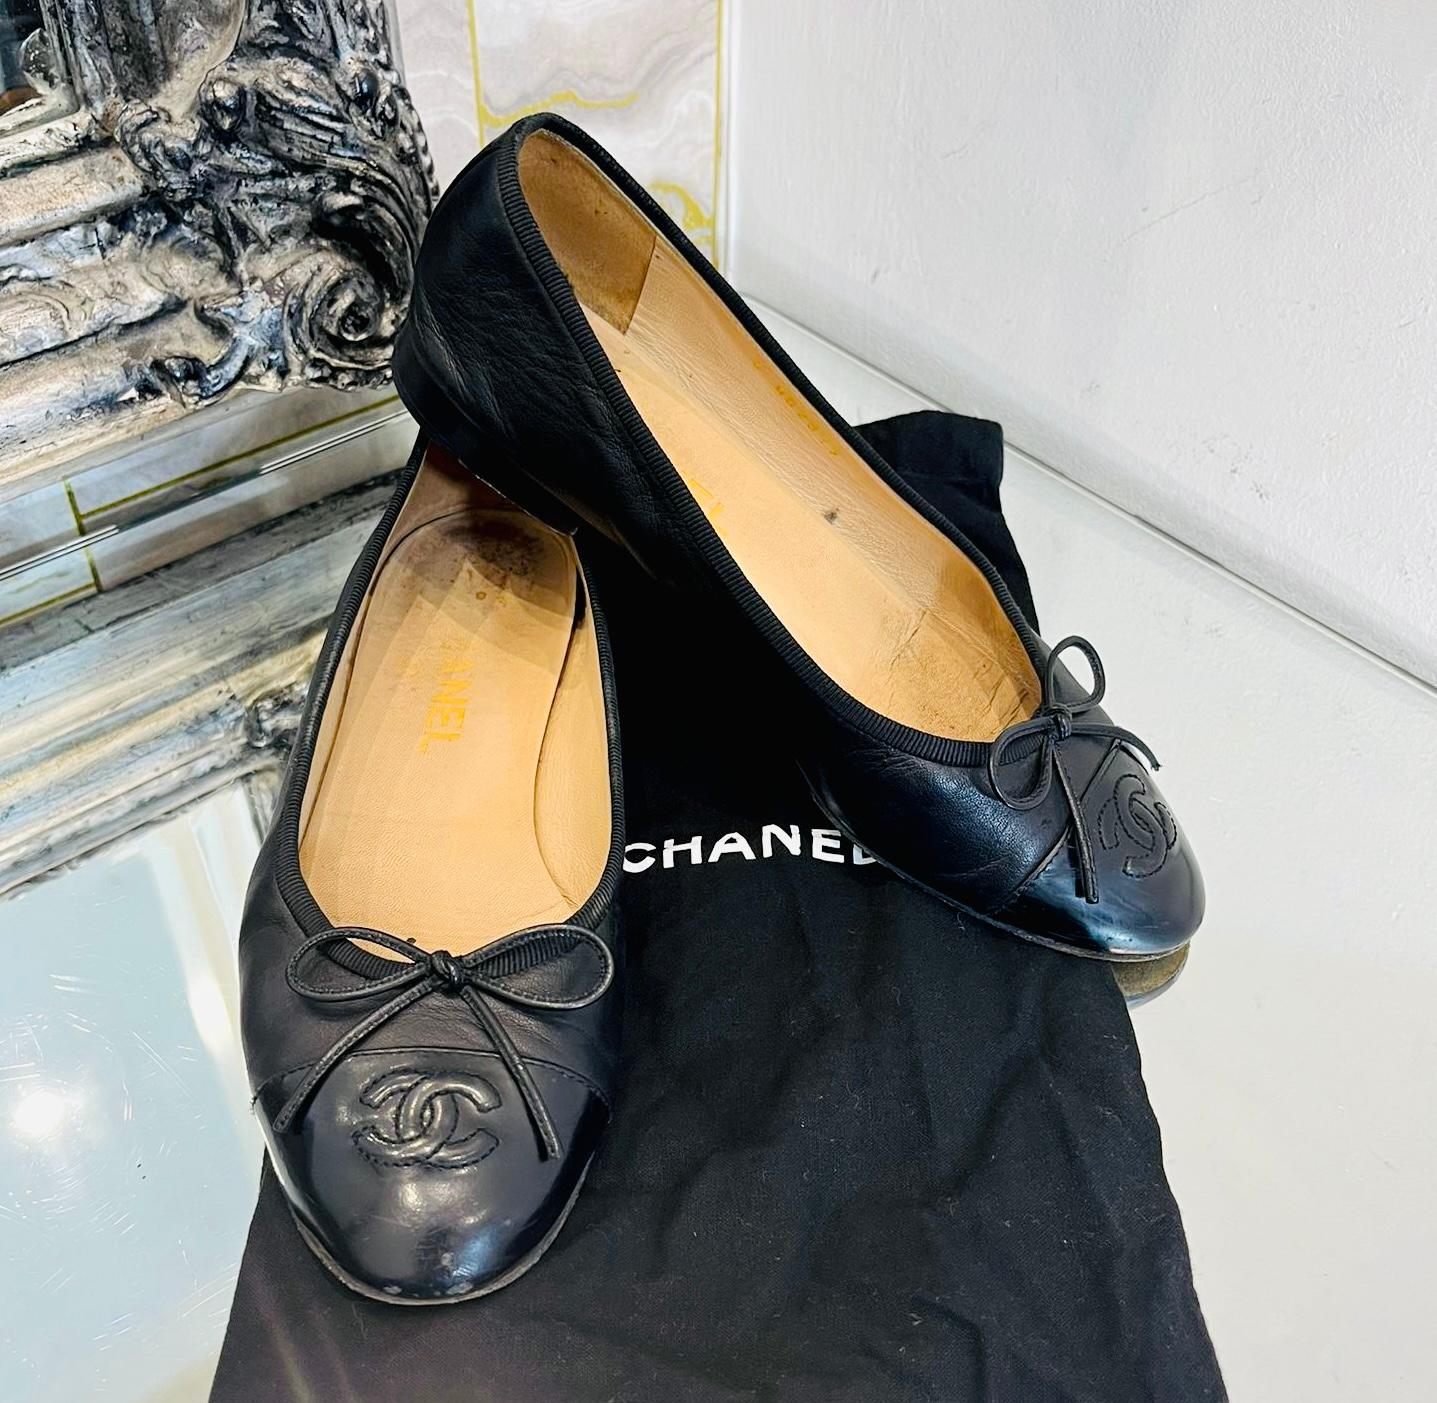 Chanel 'CC' Logo Leather Ballet Flat

Black, classy ballerinas designed with 'CC' logo stitching to the patent leather toe caps.

Detailed with bow detailing to the front, featuring leather lining and insoles. Rrp £790

Size – 37.5

Condition – Fair